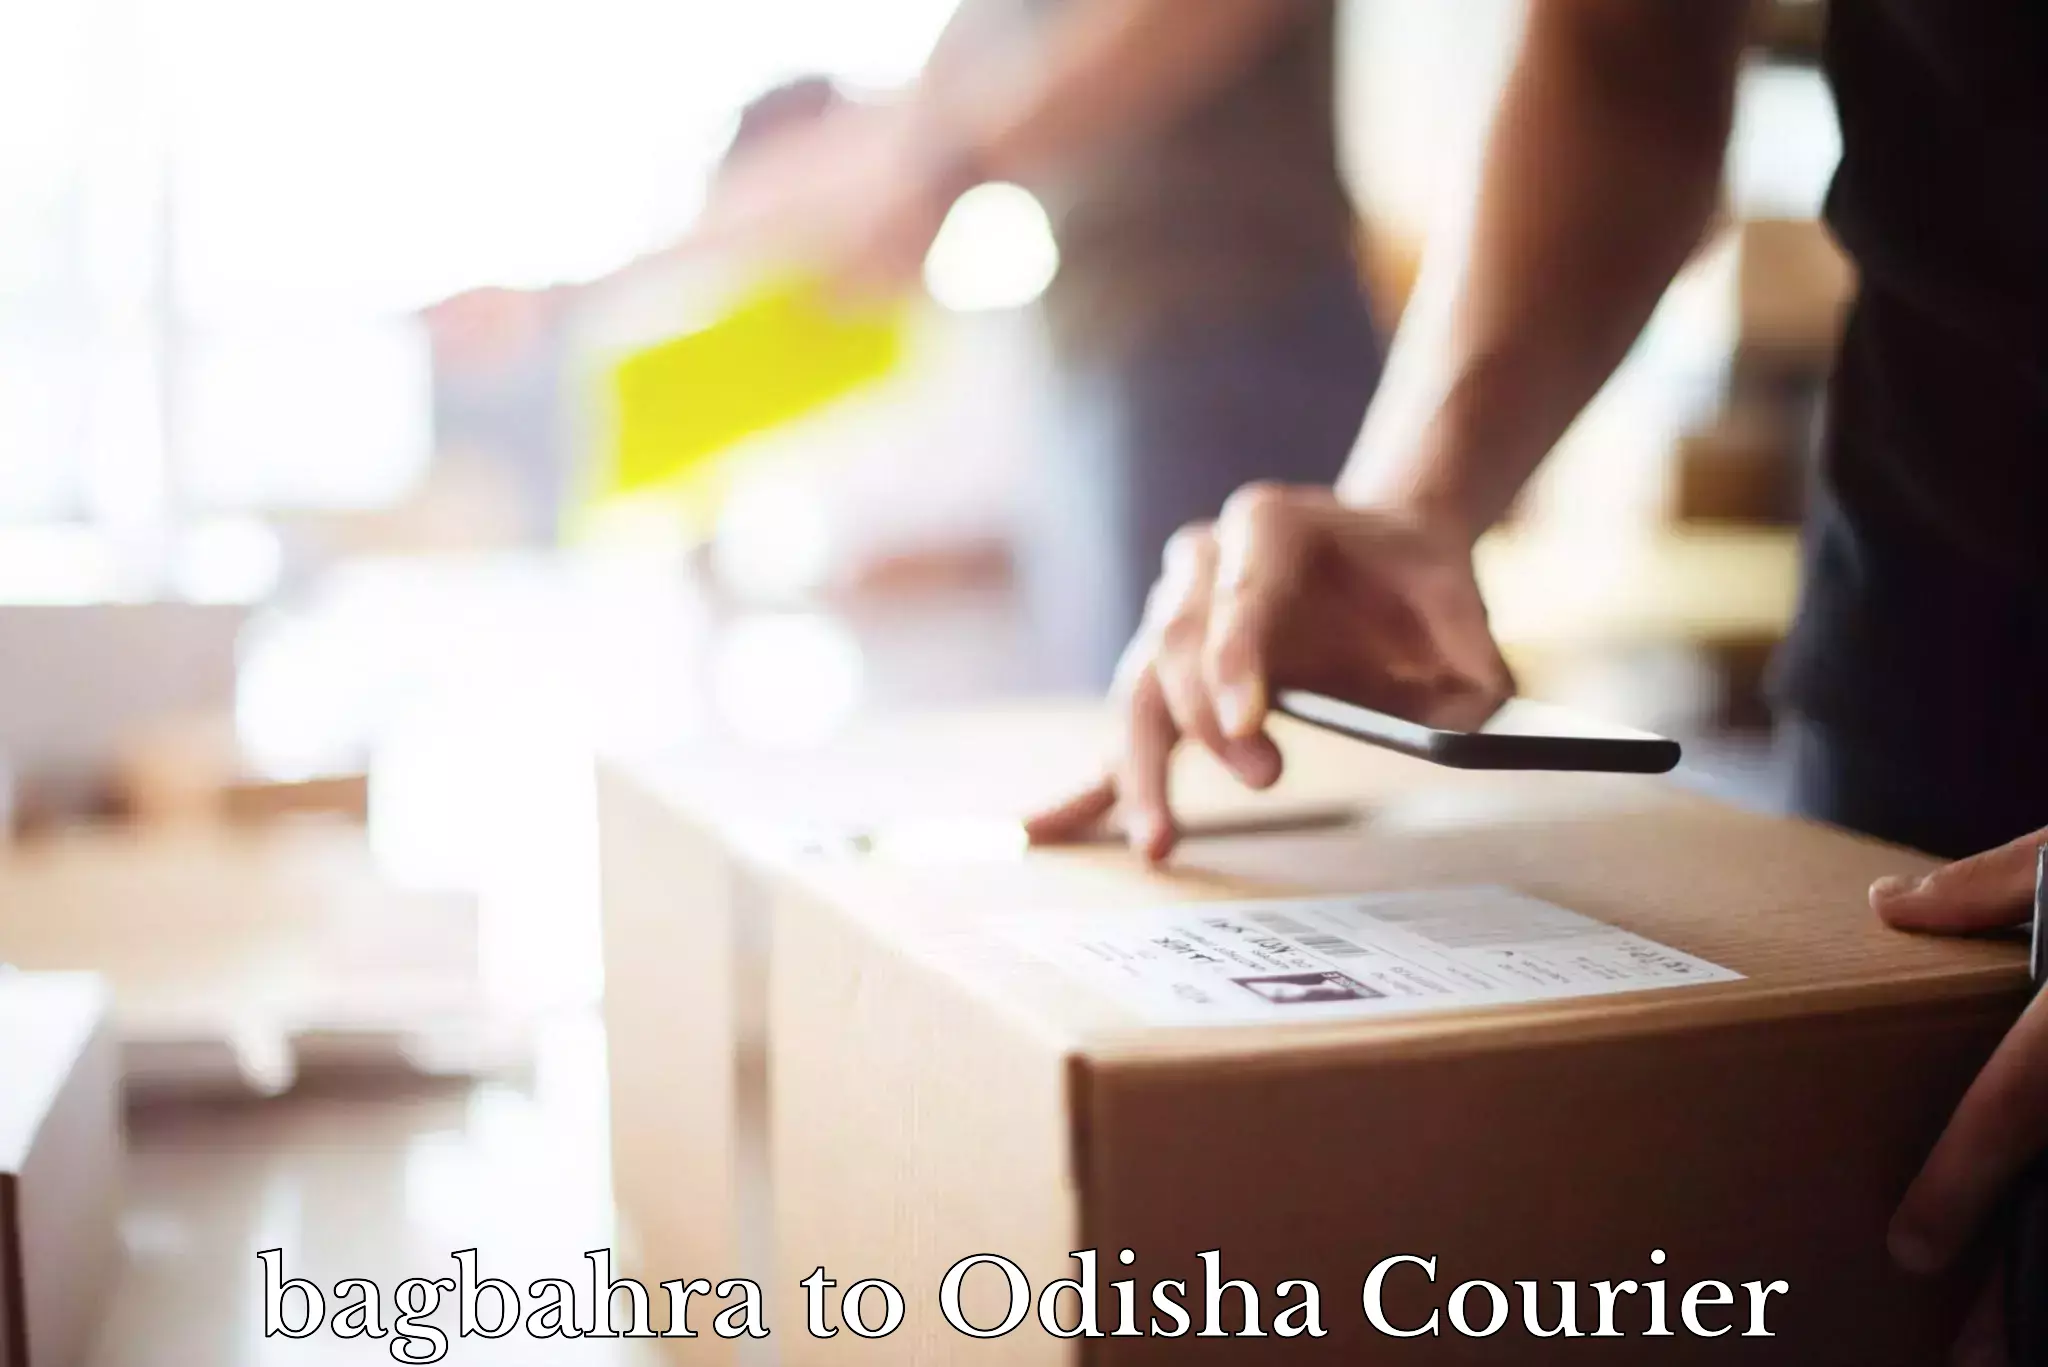 Reliable courier service bagbahra to Odisha